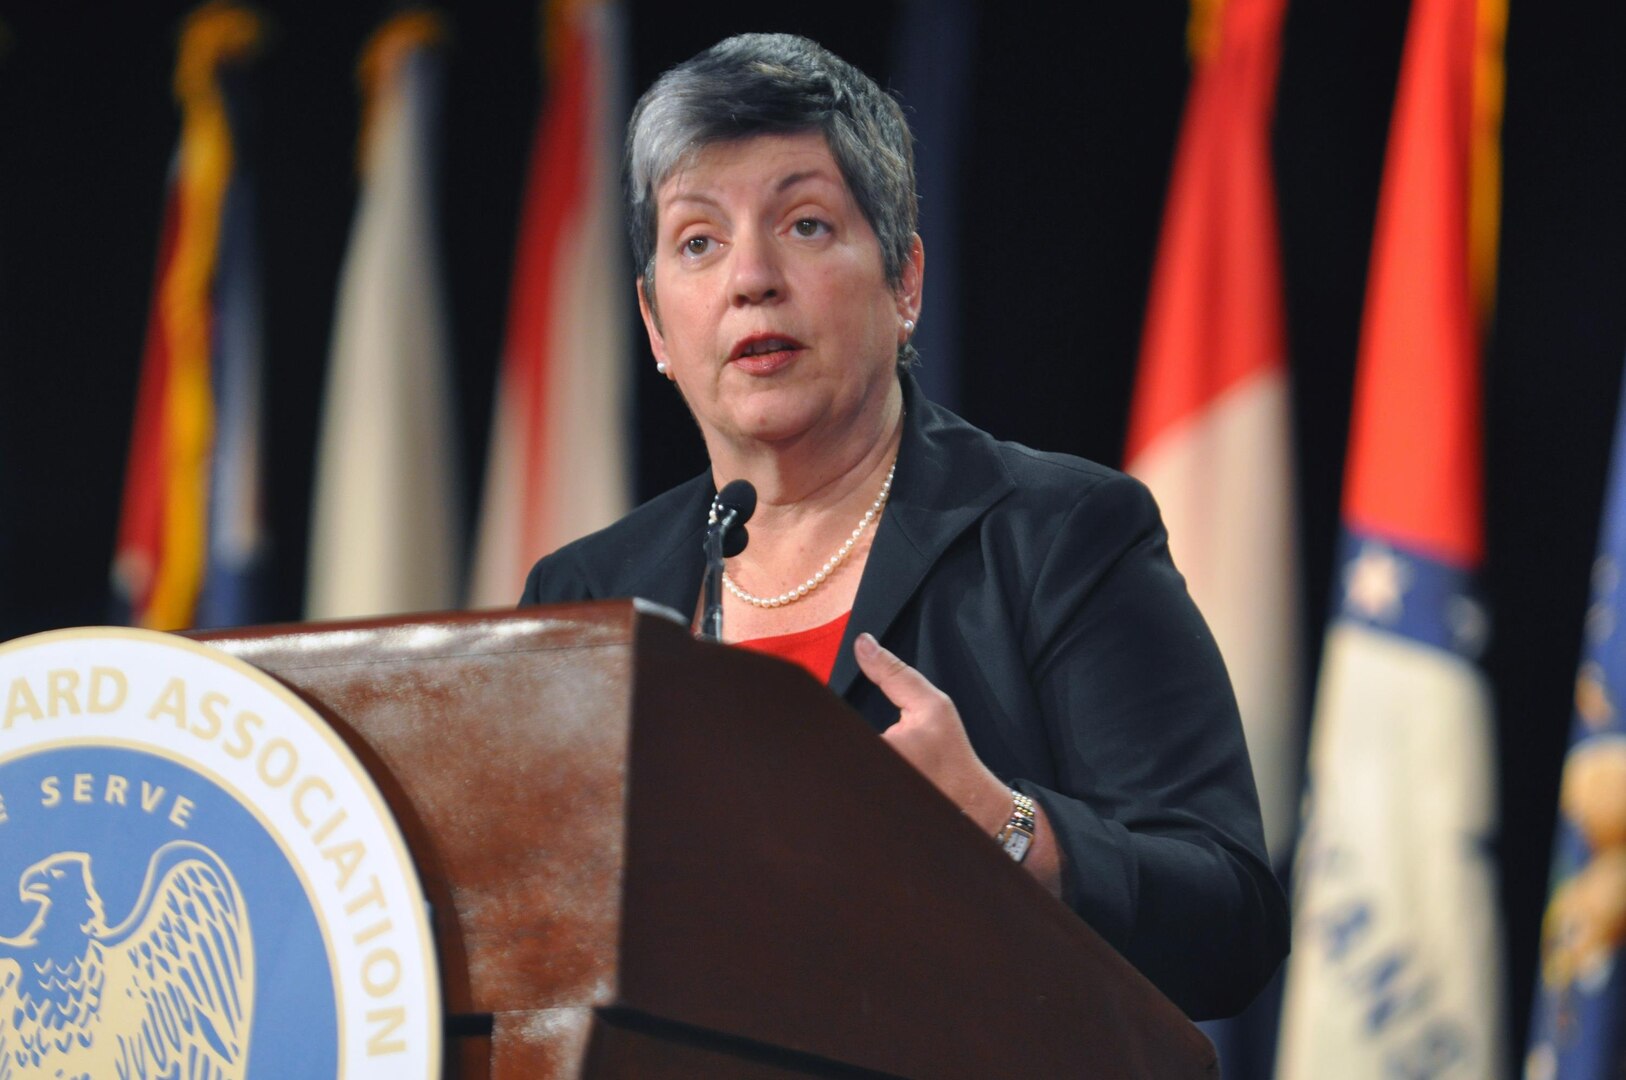 Janet Napolitano, secretary of the Department of Homeland Security, tells the 131st National Guard Association National Conference meeting in Nashville, Tenn., on Sept. 13, 2009, that the National Guard is essential to homeland security.